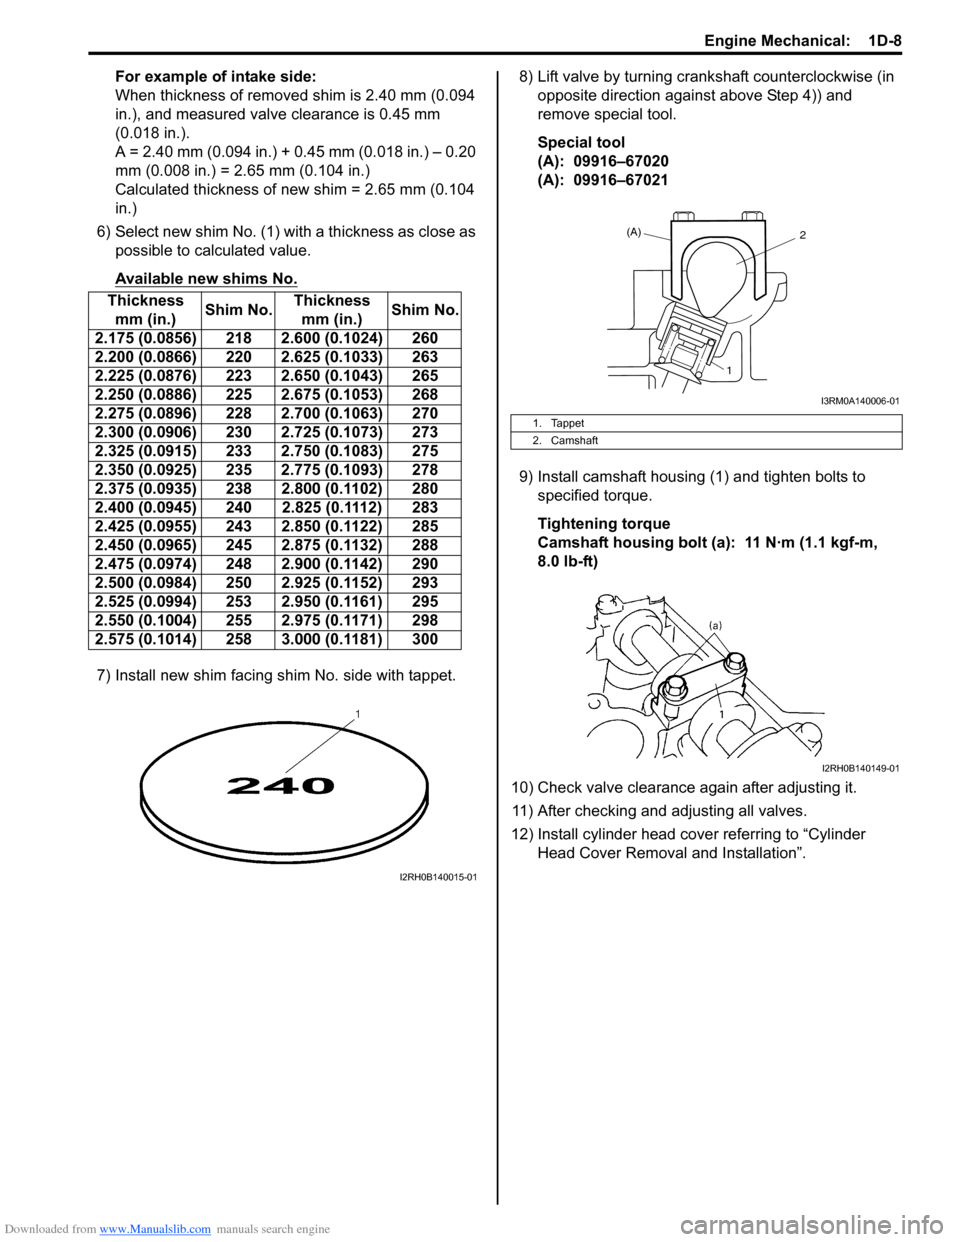 SUZUKI SWIFT 2008 2.G Service Owners Manual Downloaded from www.Manualslib.com manuals search engine Engine Mechanical:  1D-8
For example of intake side:
When thickness of removed shim is 2.40 mm (0.094 
in.), and measured valve clearance is 0.